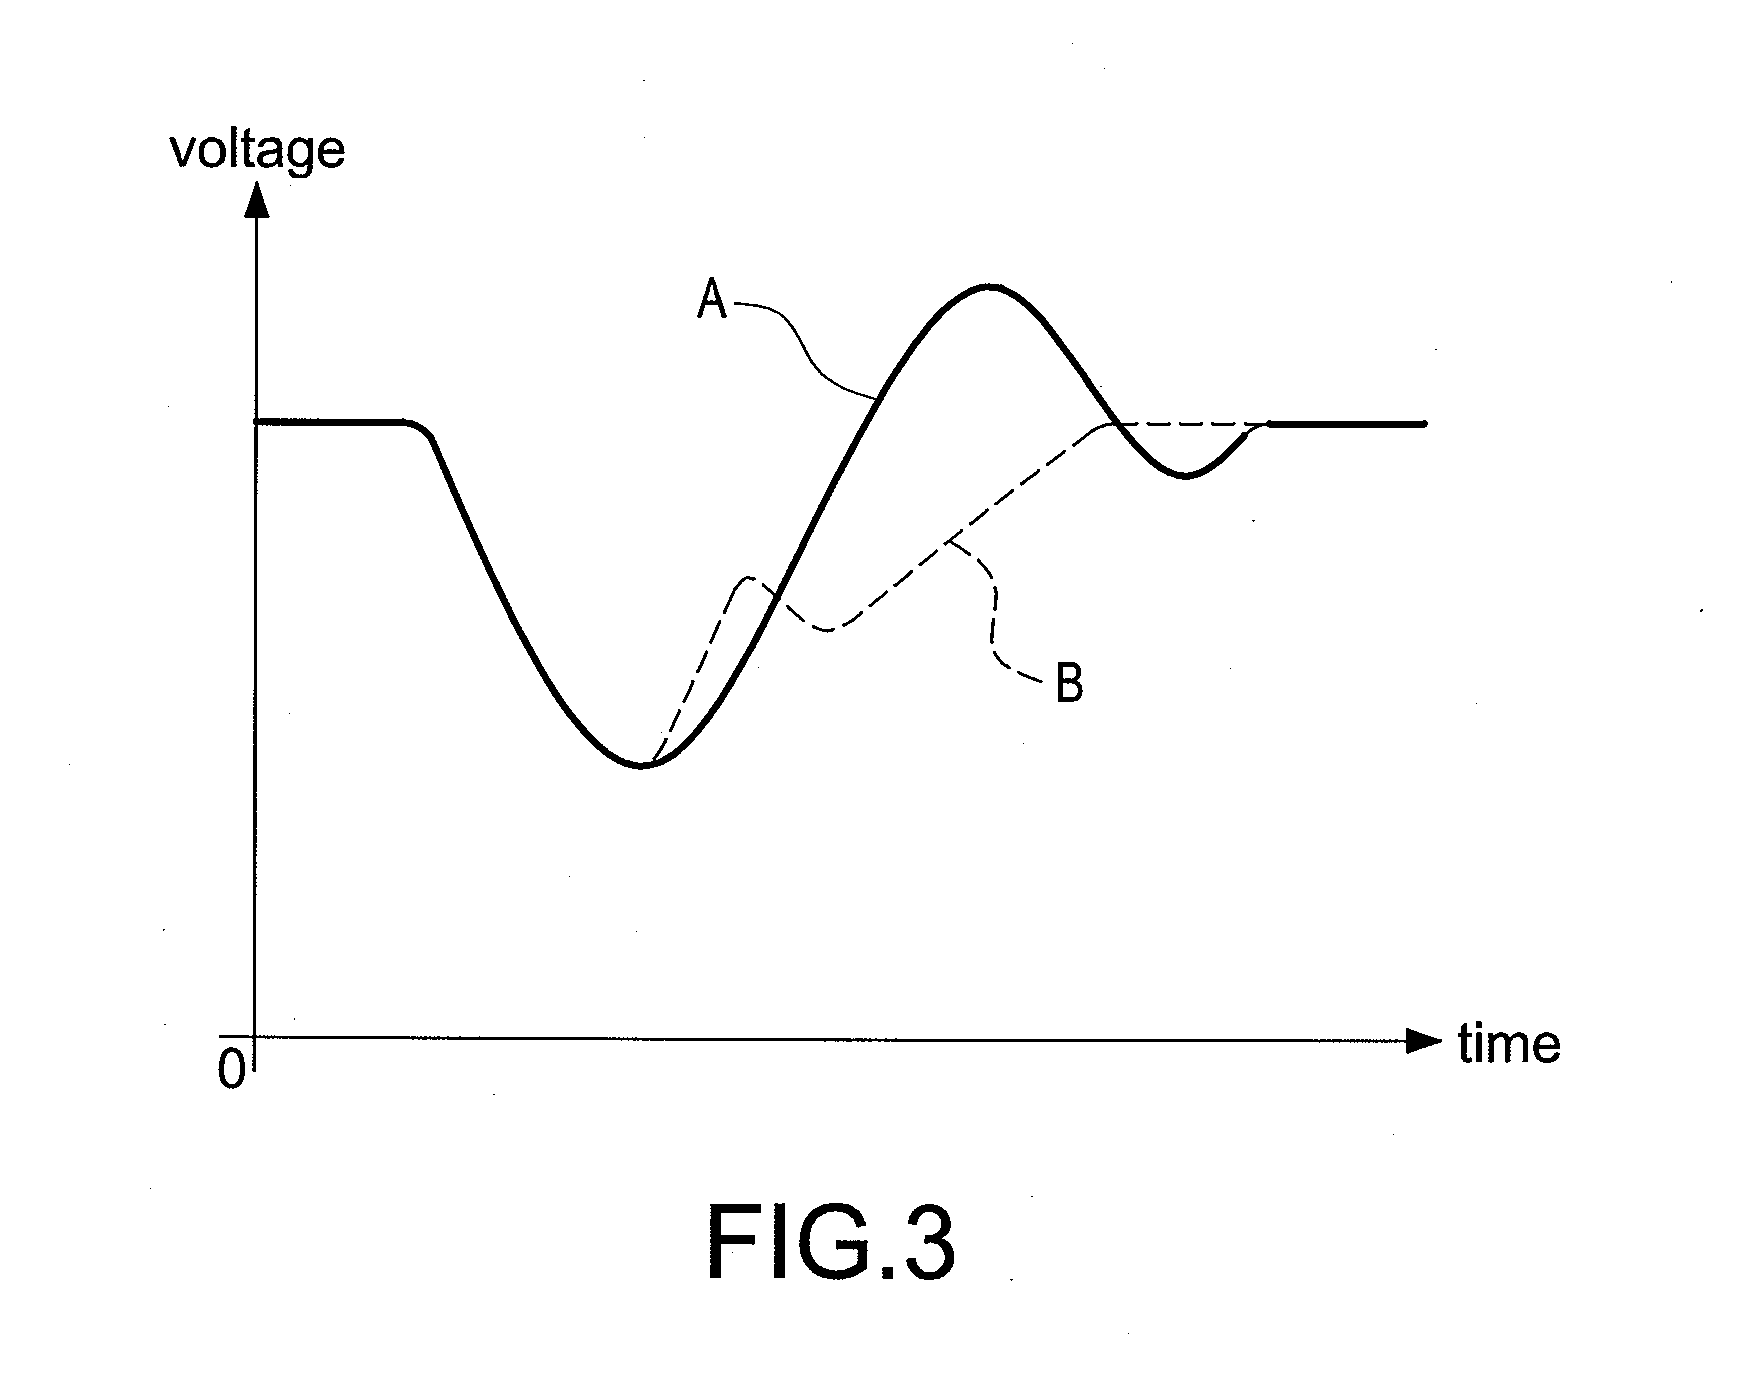 Power supply apparatus with reducing voltage overshooting